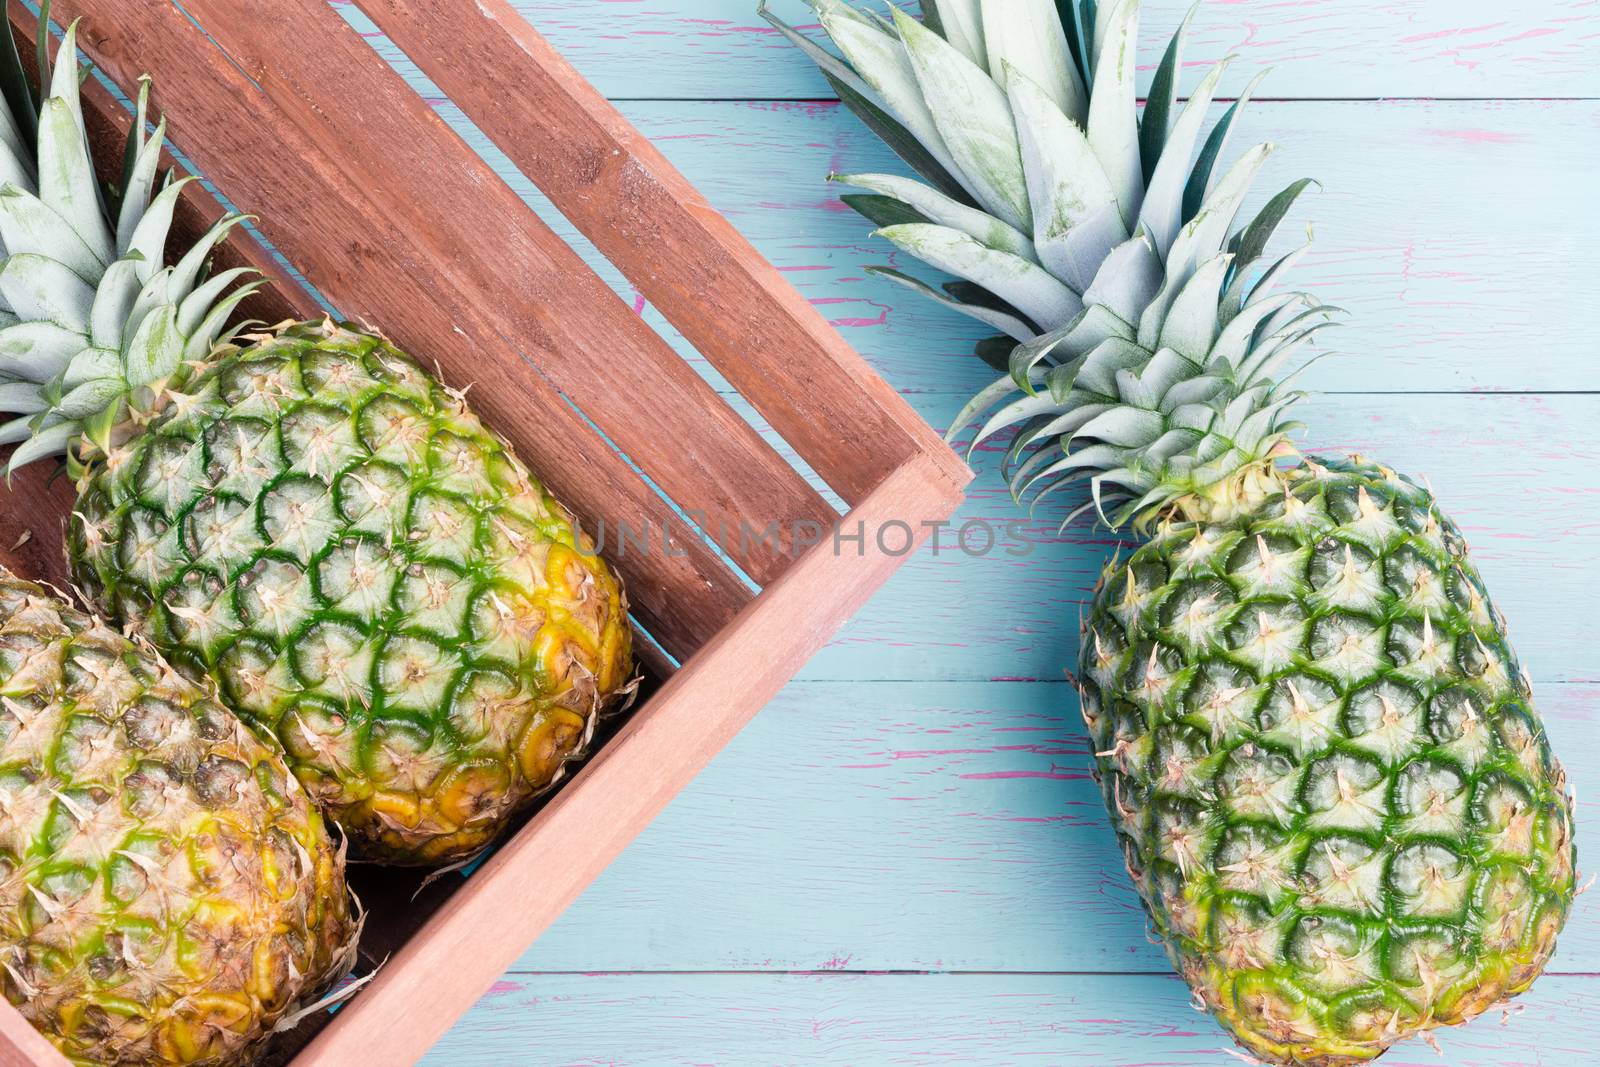 Three fresh pineapples, two in a wooden crate and one alongside on a blue wooden table lying on their sides viewed close up from above